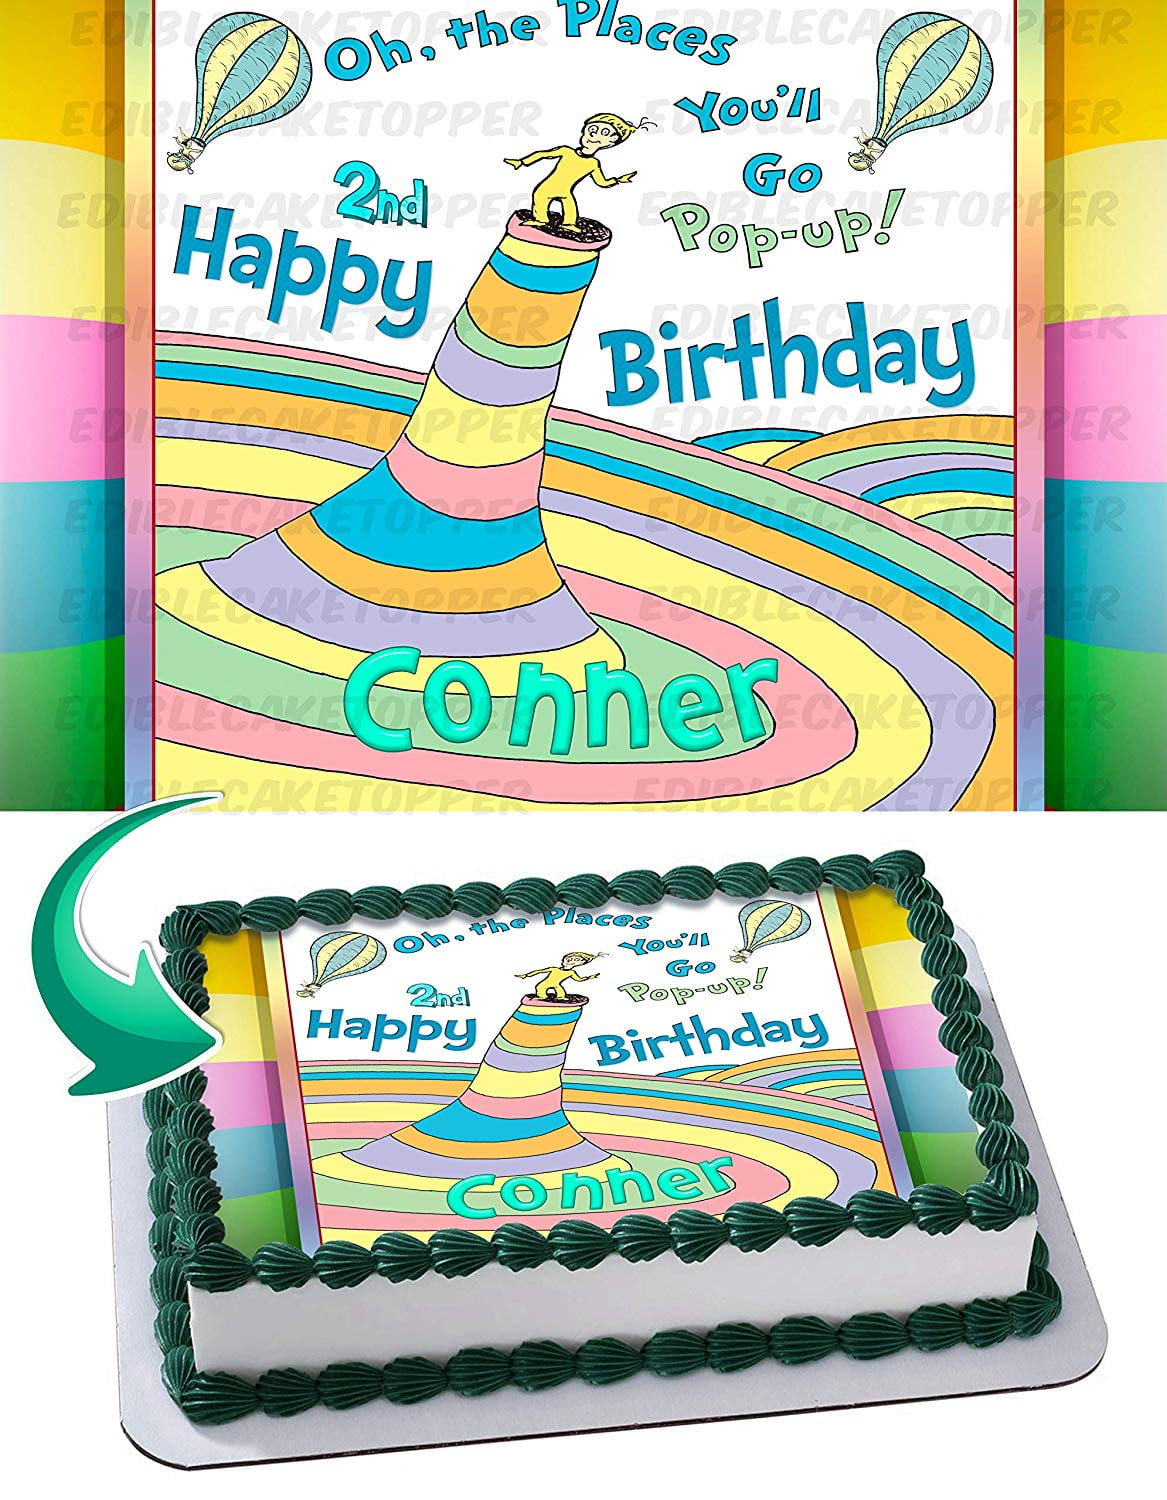 Seuss Oh the places we'll go edible cake strips cake topper decorations Dr 